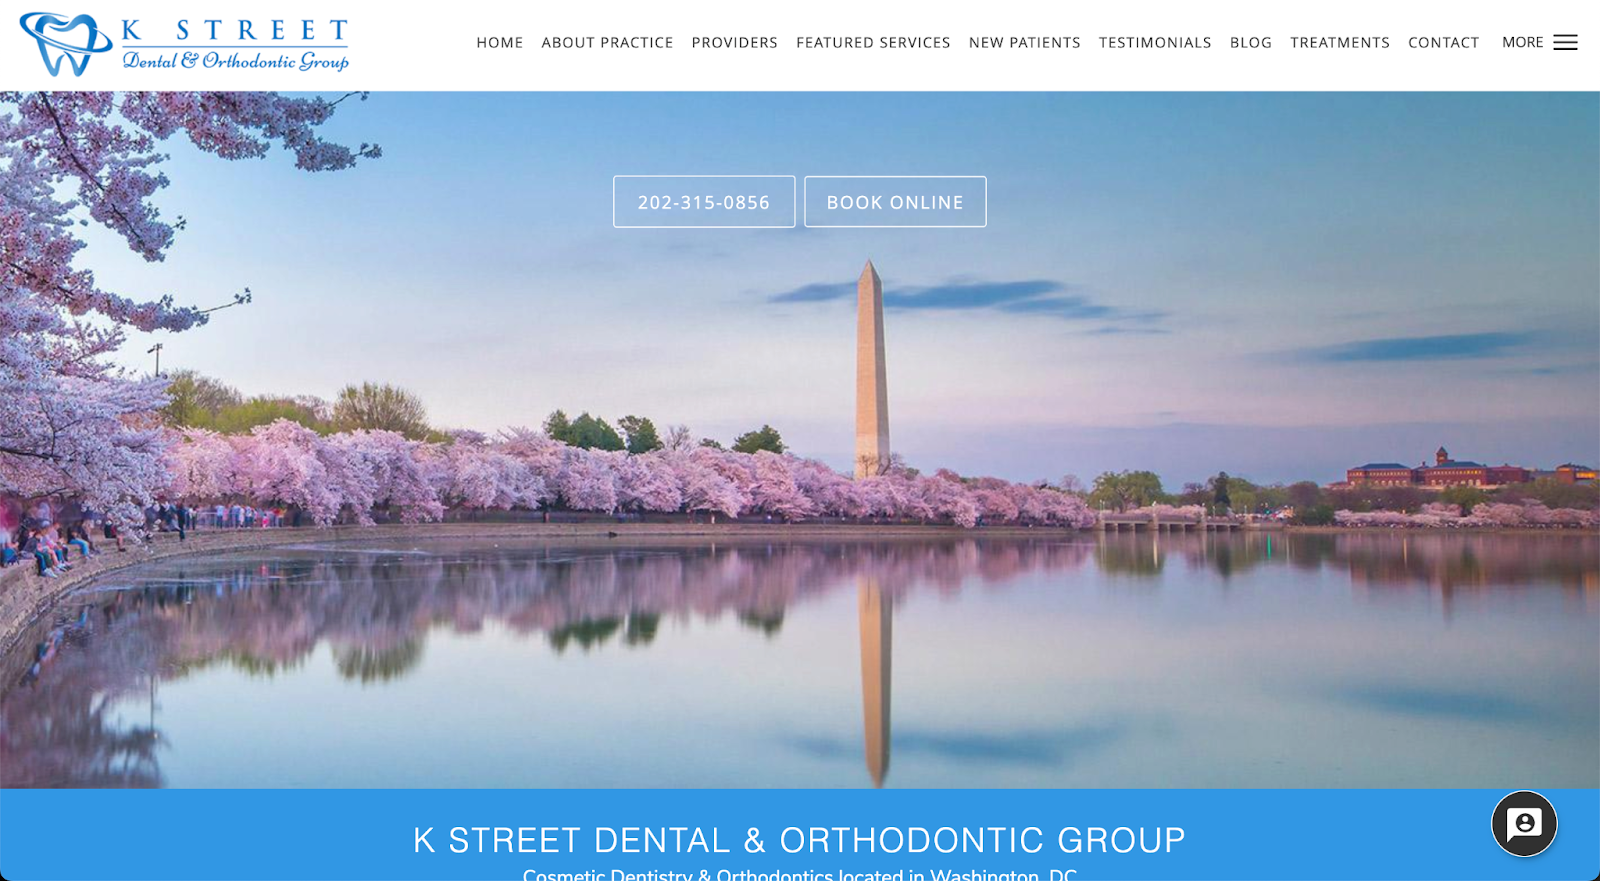 The clean design of the K Street Dental website gave it an edge above the rest to make our list of the best dental website designs